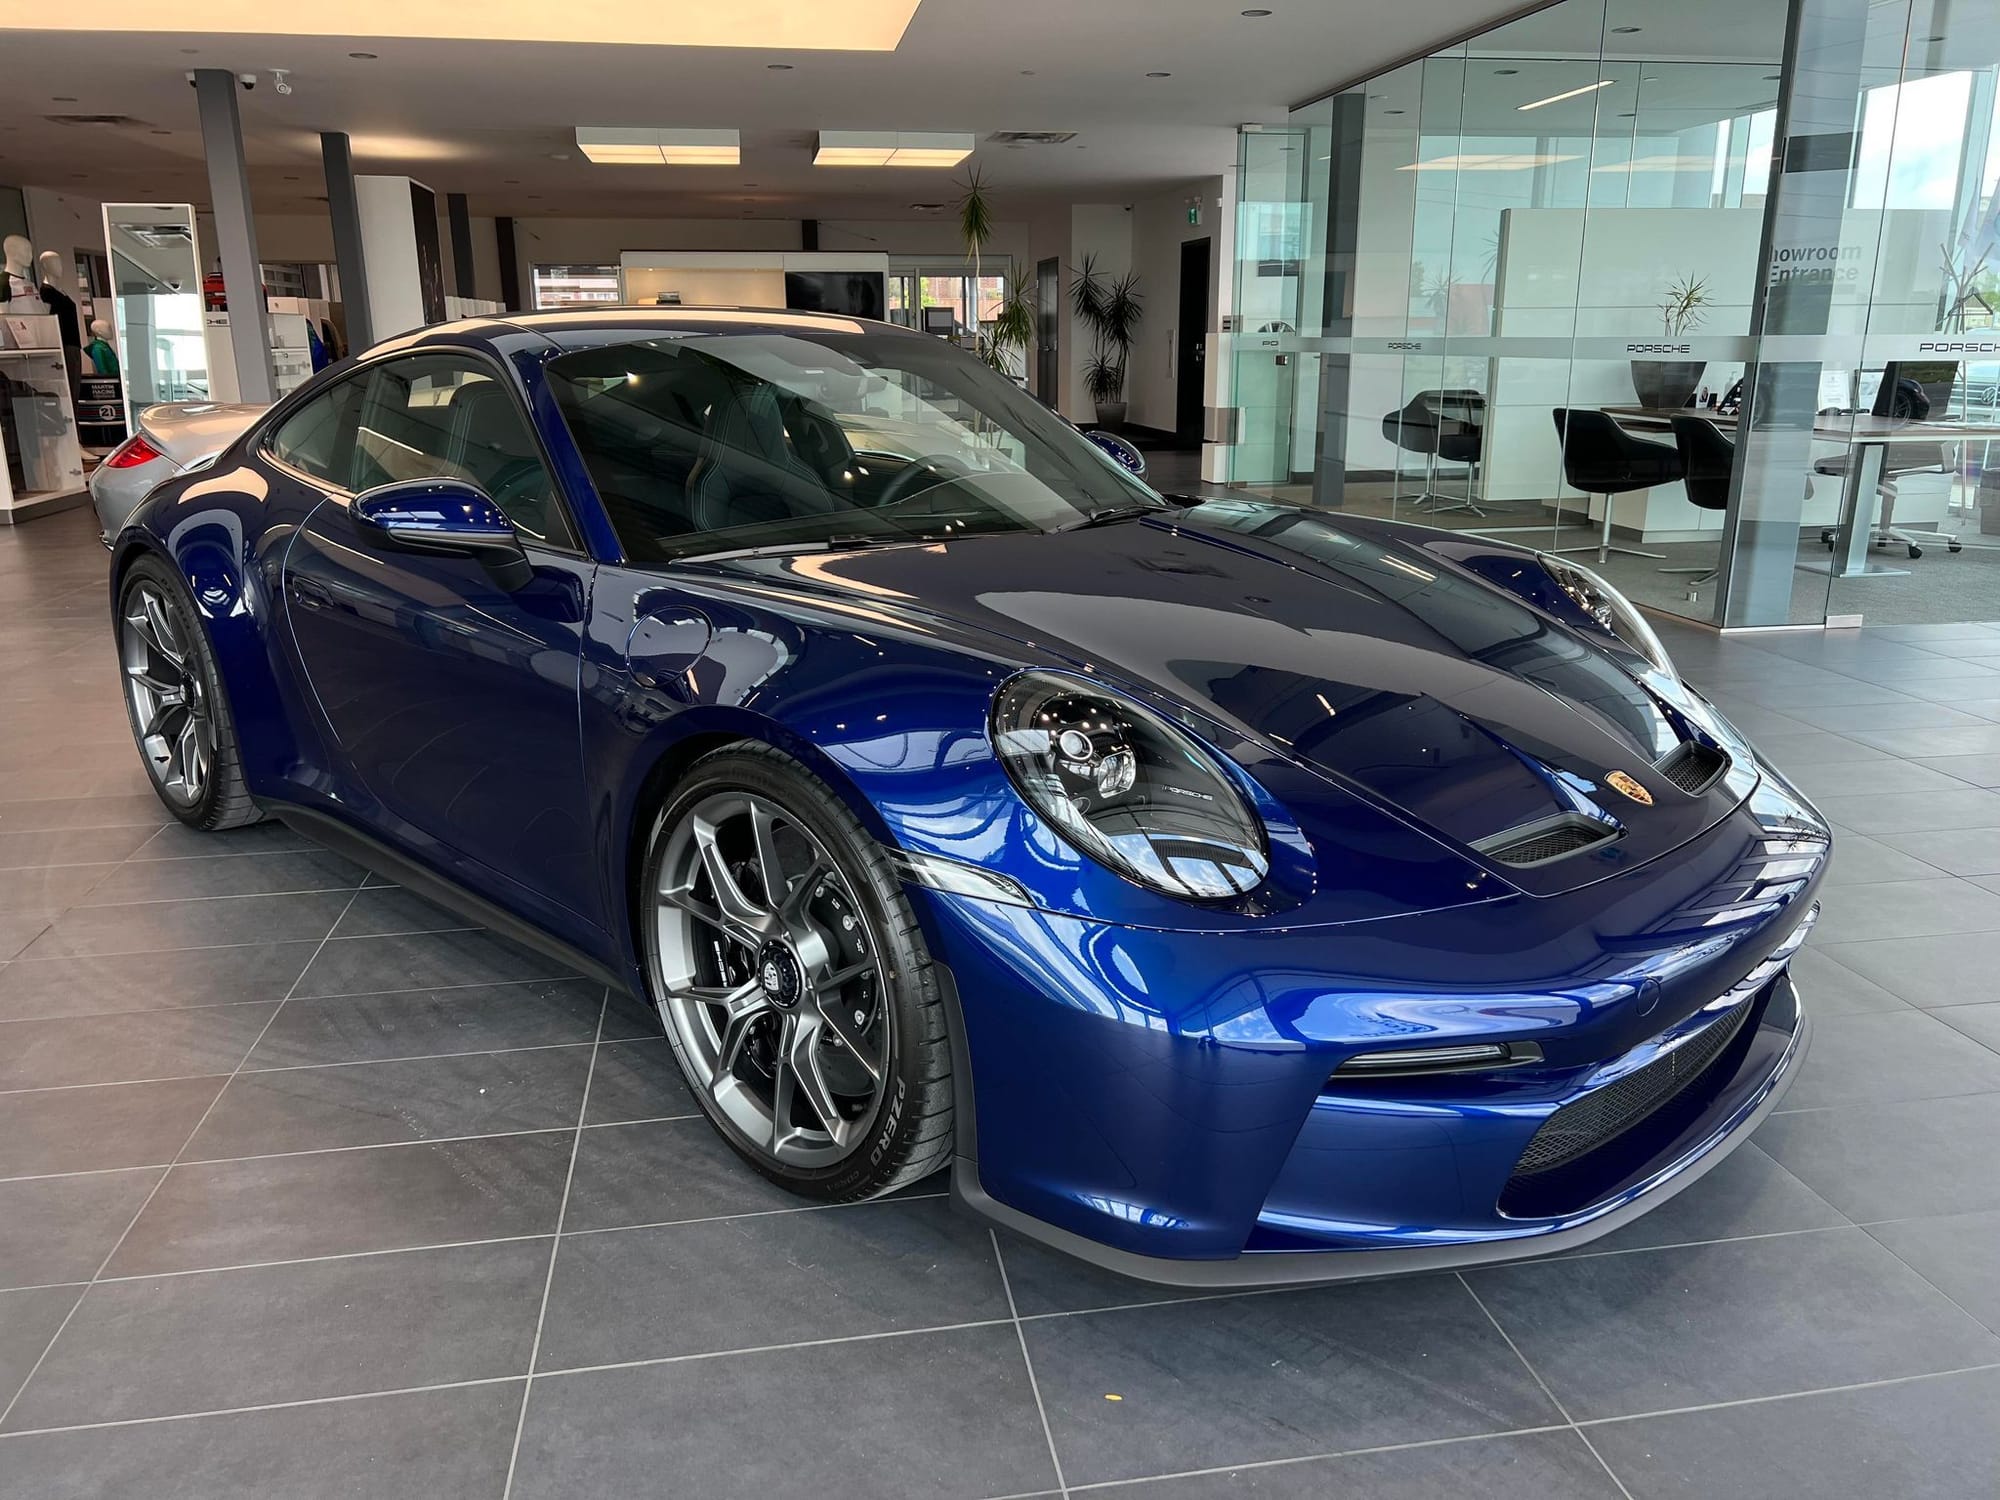 2022 Porsche 911 - 2022 GT3 Touring | Orig Owner | PCCB | FAL | PPF | 1850 miles - Used - VIN WP0AC2A95NS270972 - 1,850 Miles - 6 cyl - 2WD - Manual - Coupe - Blue - Detroit, MI 48236, United States